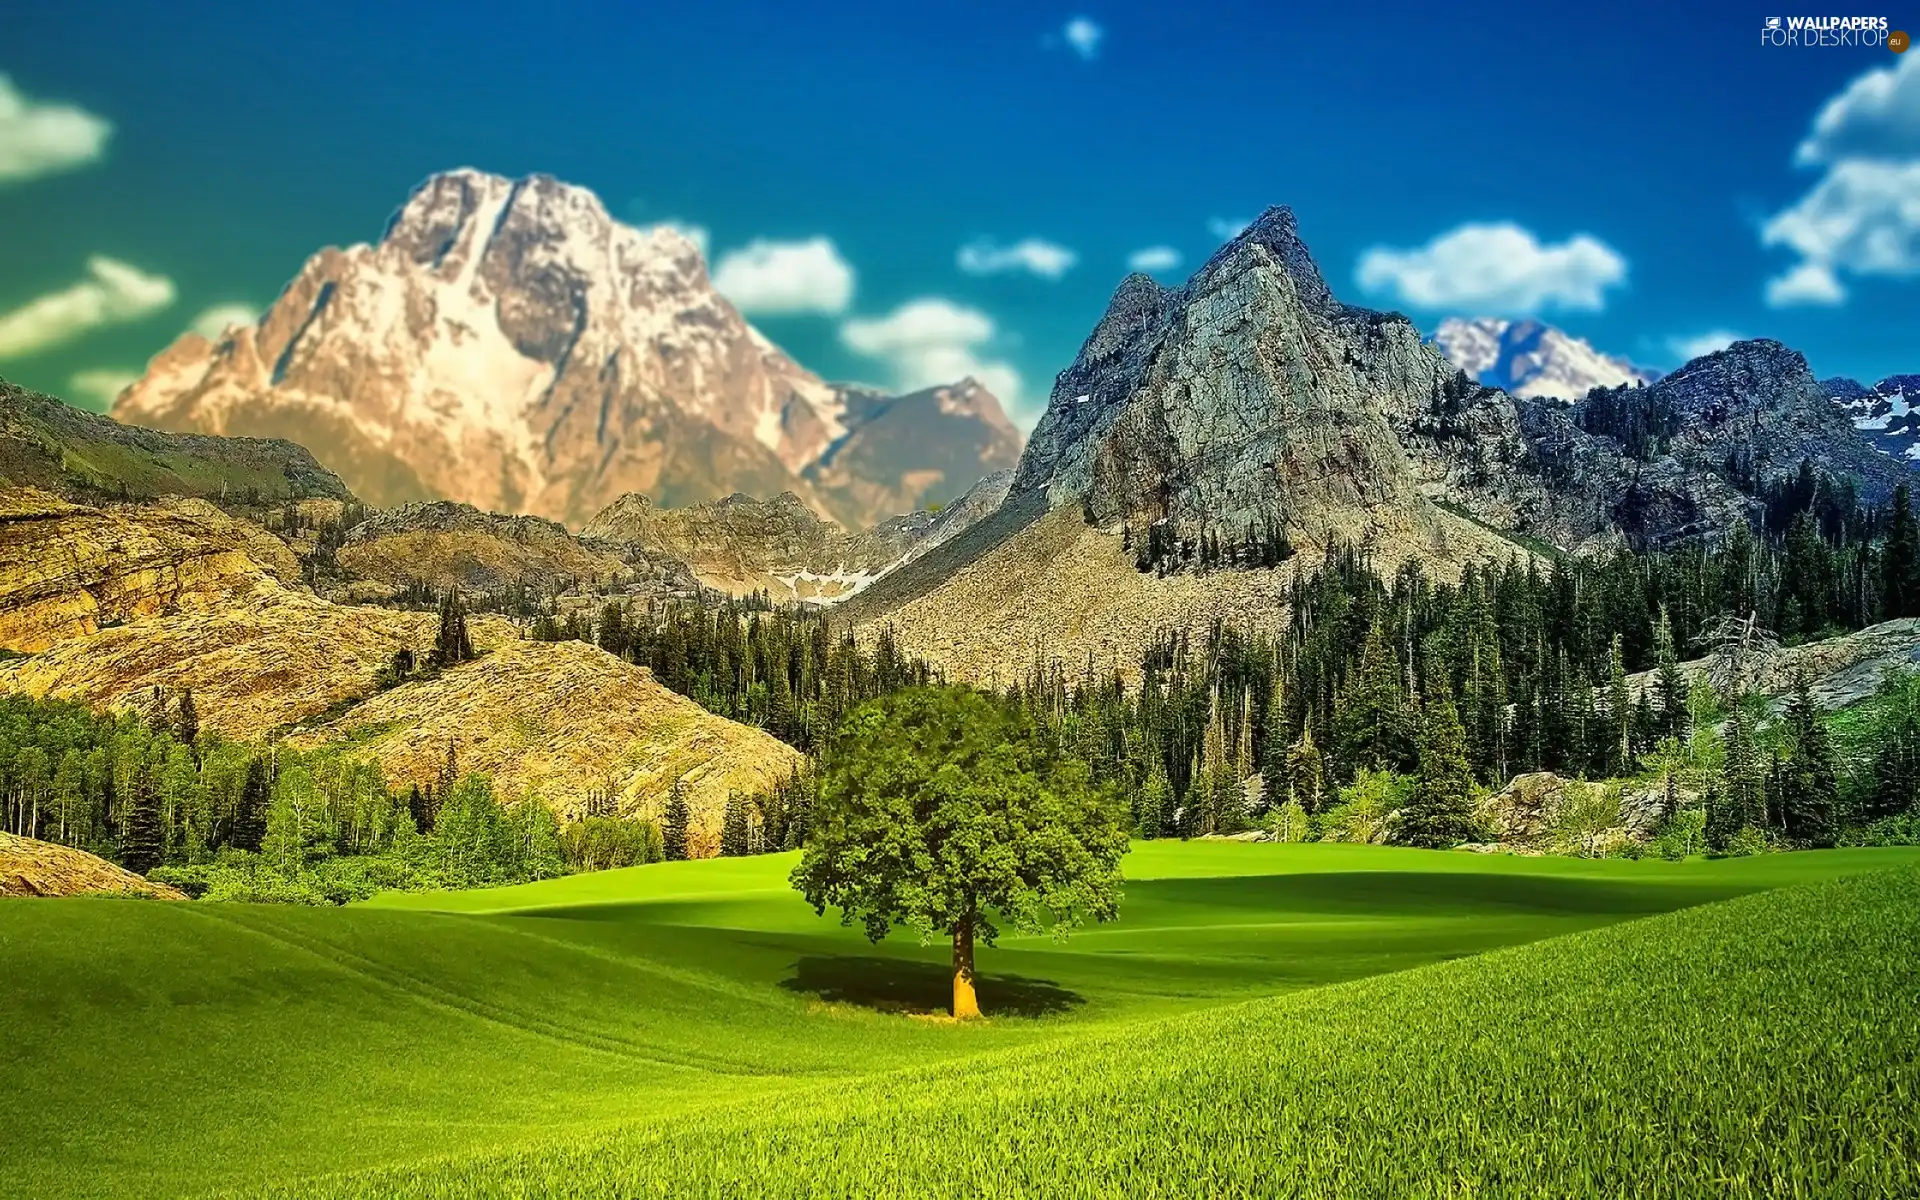 Sky, trees, grass, viewes, Mountains, Meadow, clouds